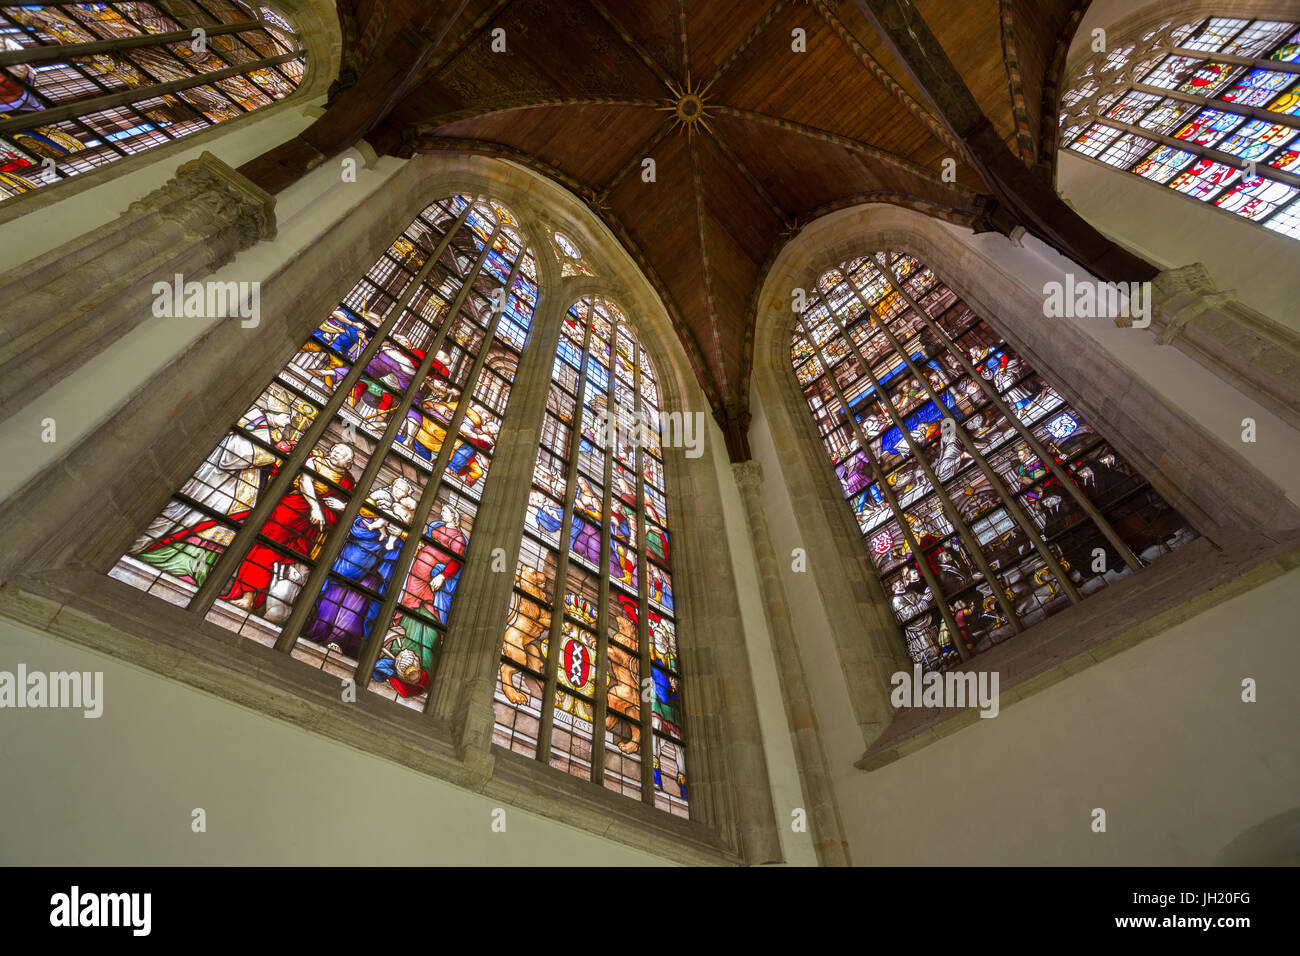 OLD CHURCH OR DE OUDE KERK, AMSTERDAM, THE NETHERLANDS - JULI 7, 2017: Famous stained glass windows in the Maria Chapel. Stock Photo